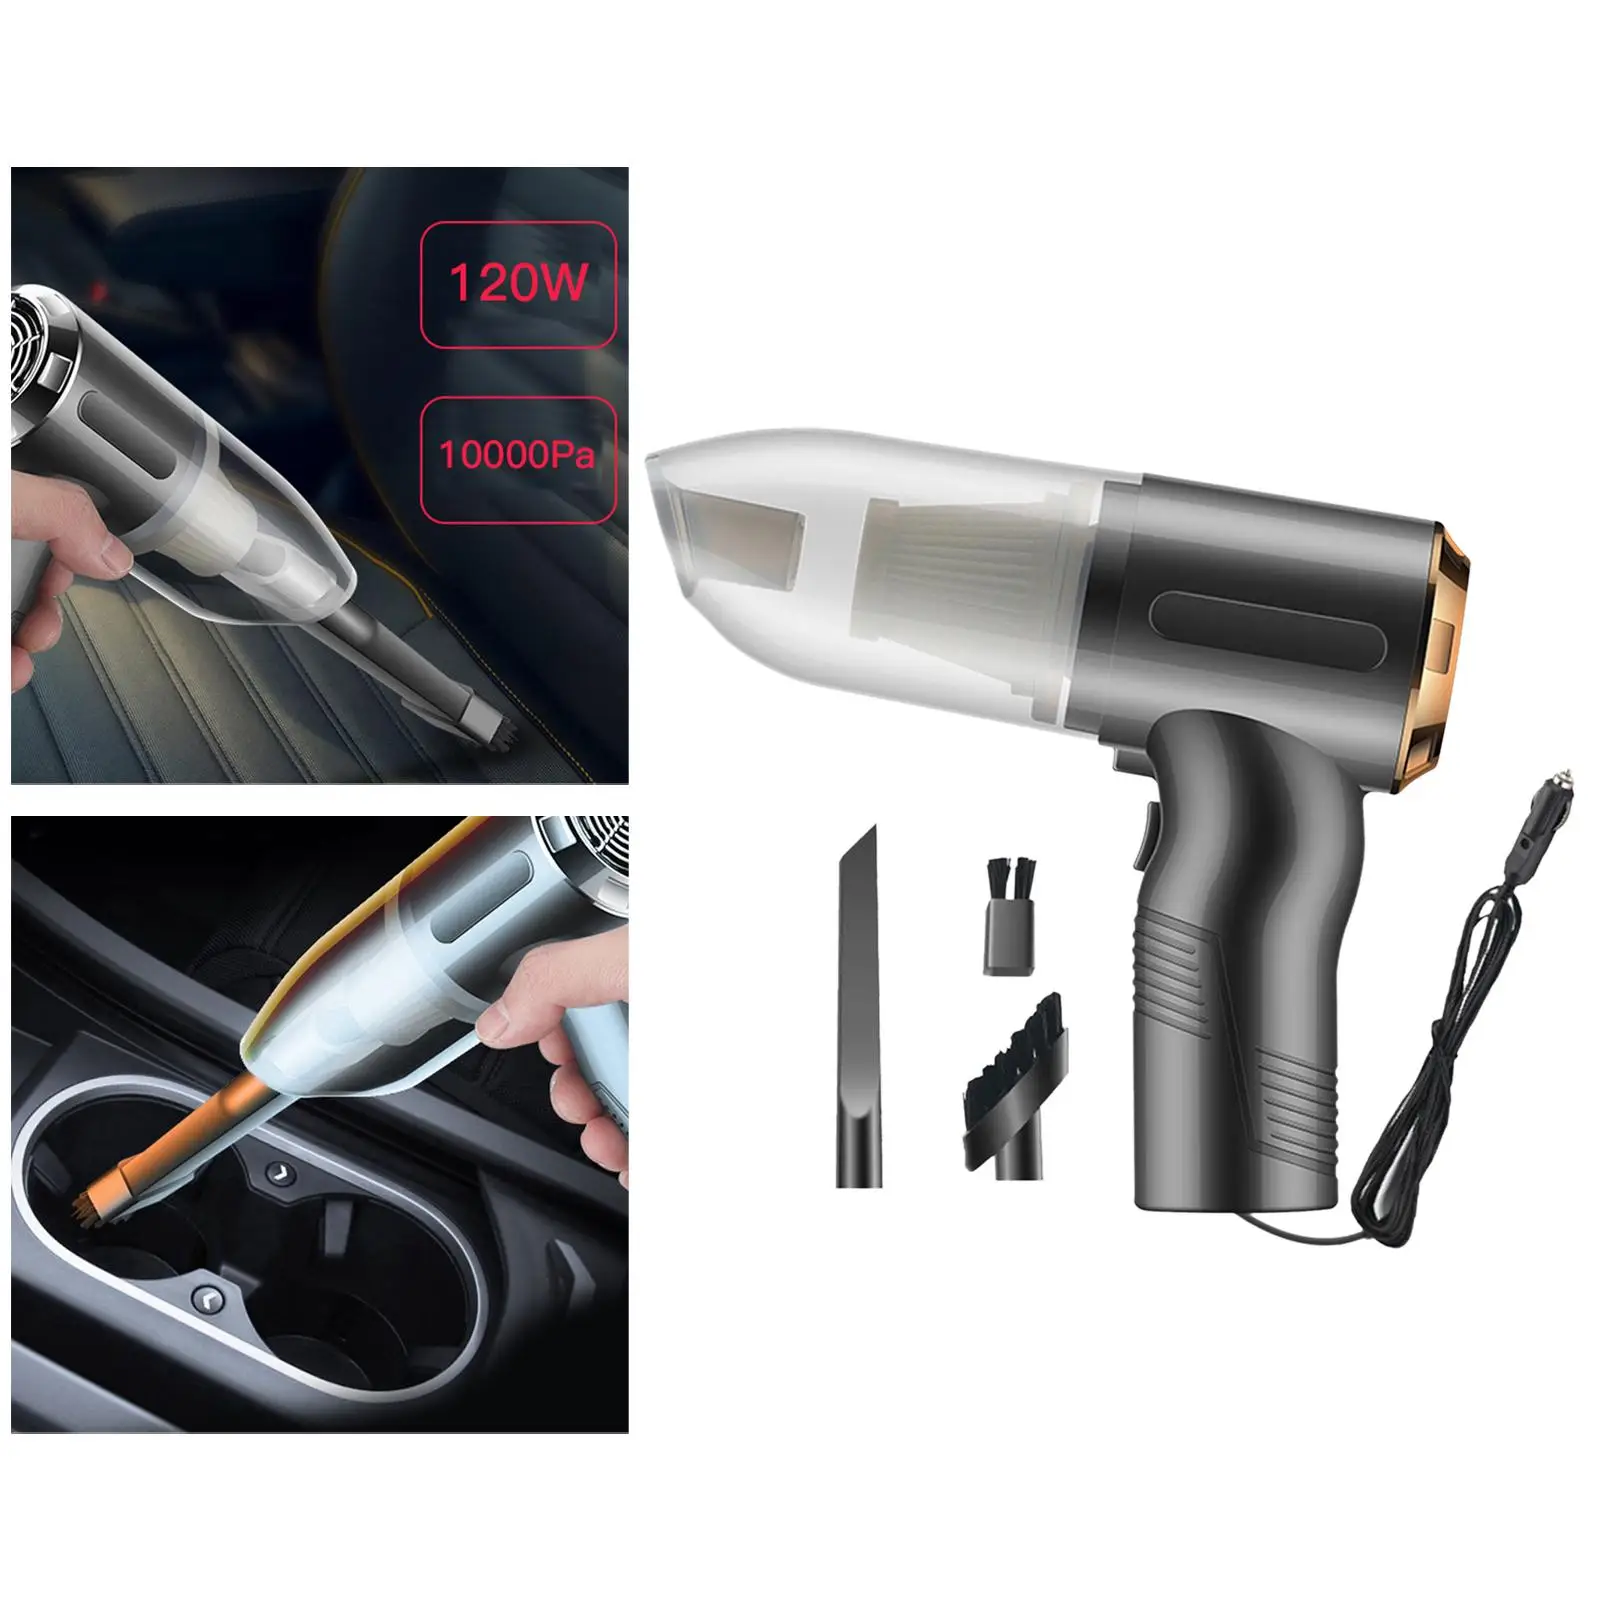 Handheld Vacuum Cleaner   Car Vacuum Cleaner Rechargeable for Car, Home, Office, Travel Cleaning